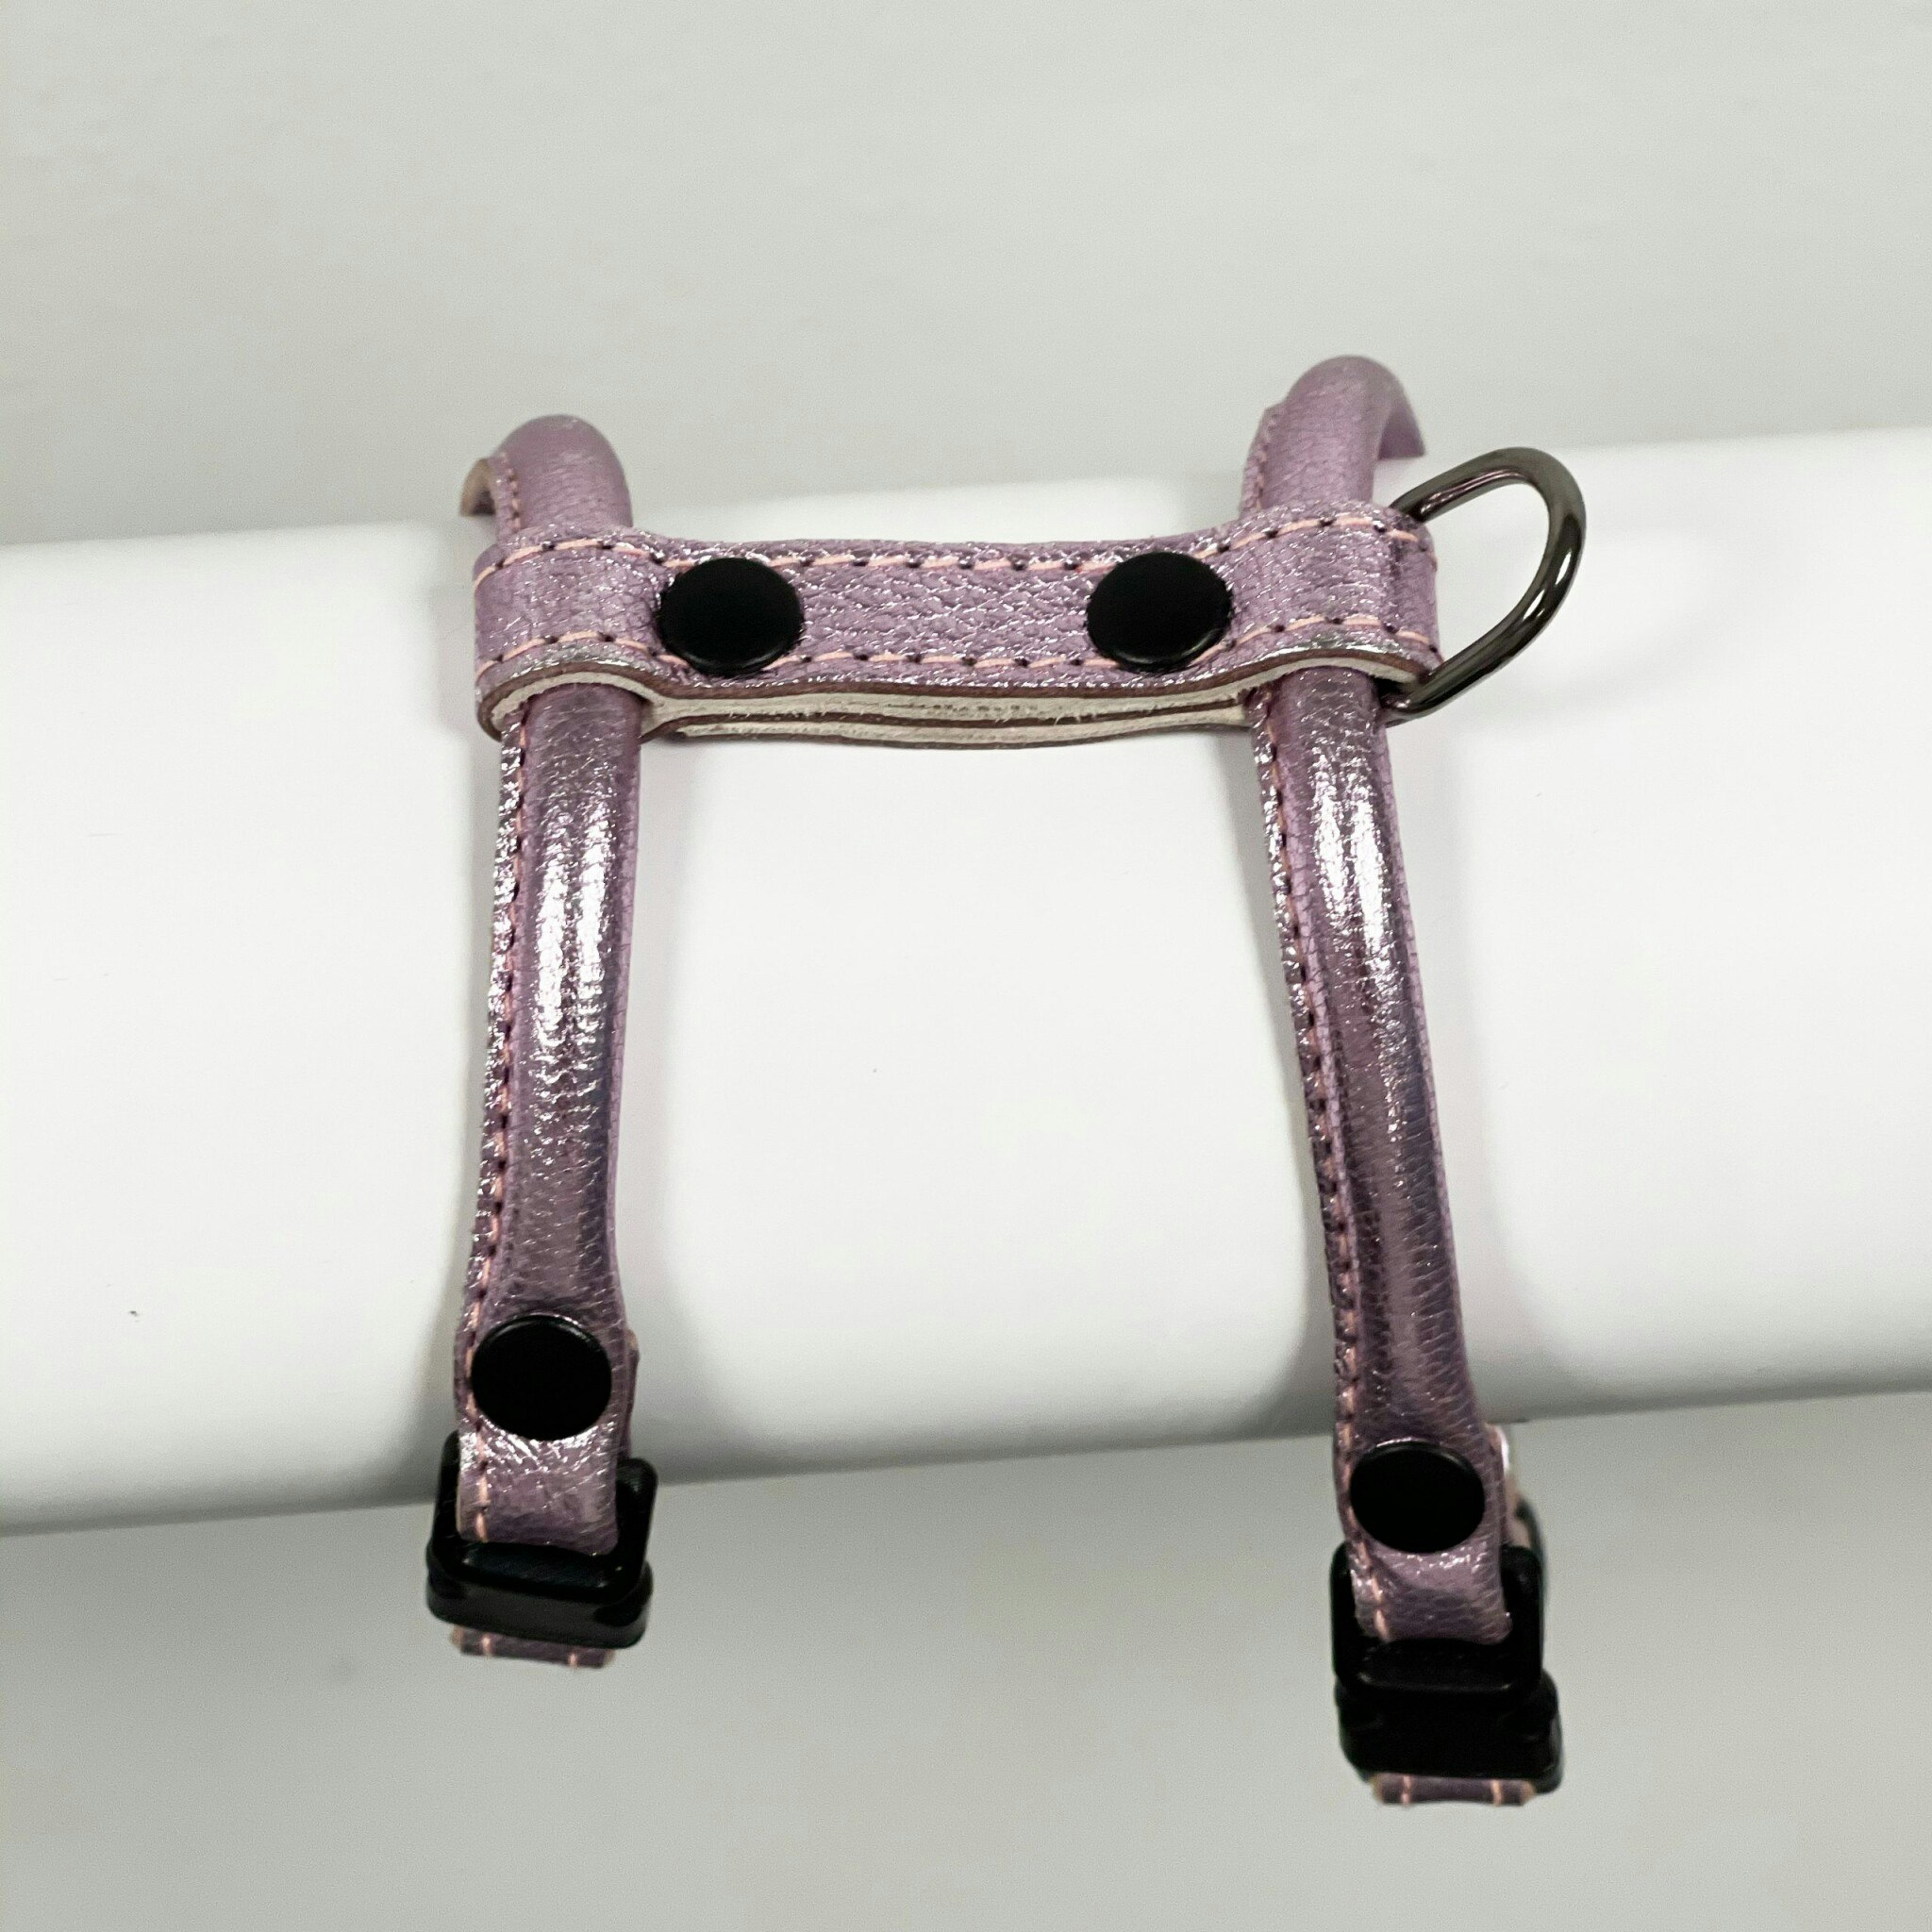 Del Mar Round Stitched Leather Harness Metallic Pink